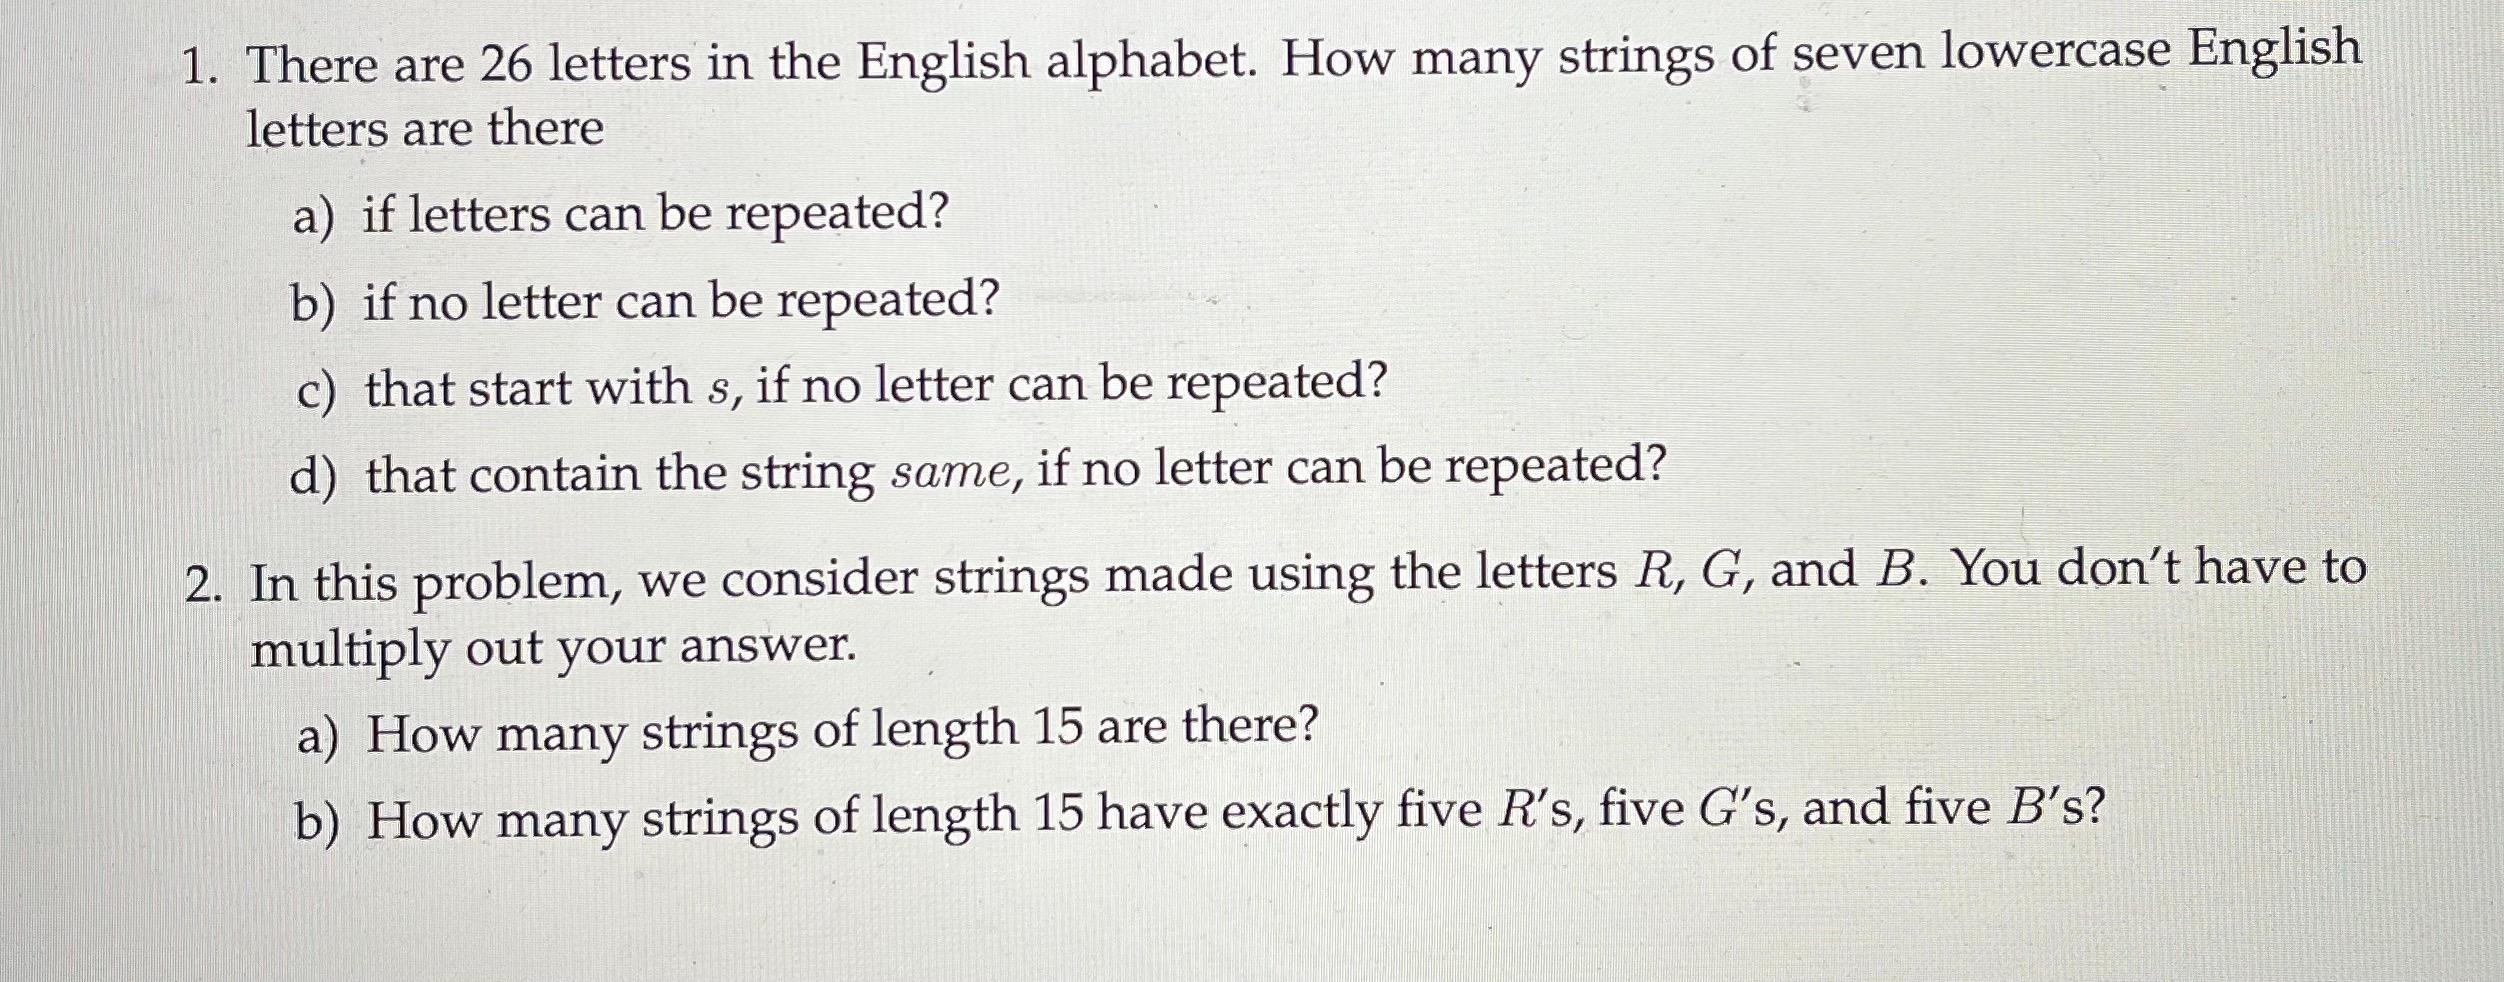 how-many-letters-are-there-in-the-english-alphabet-the-answer-is-a-bit